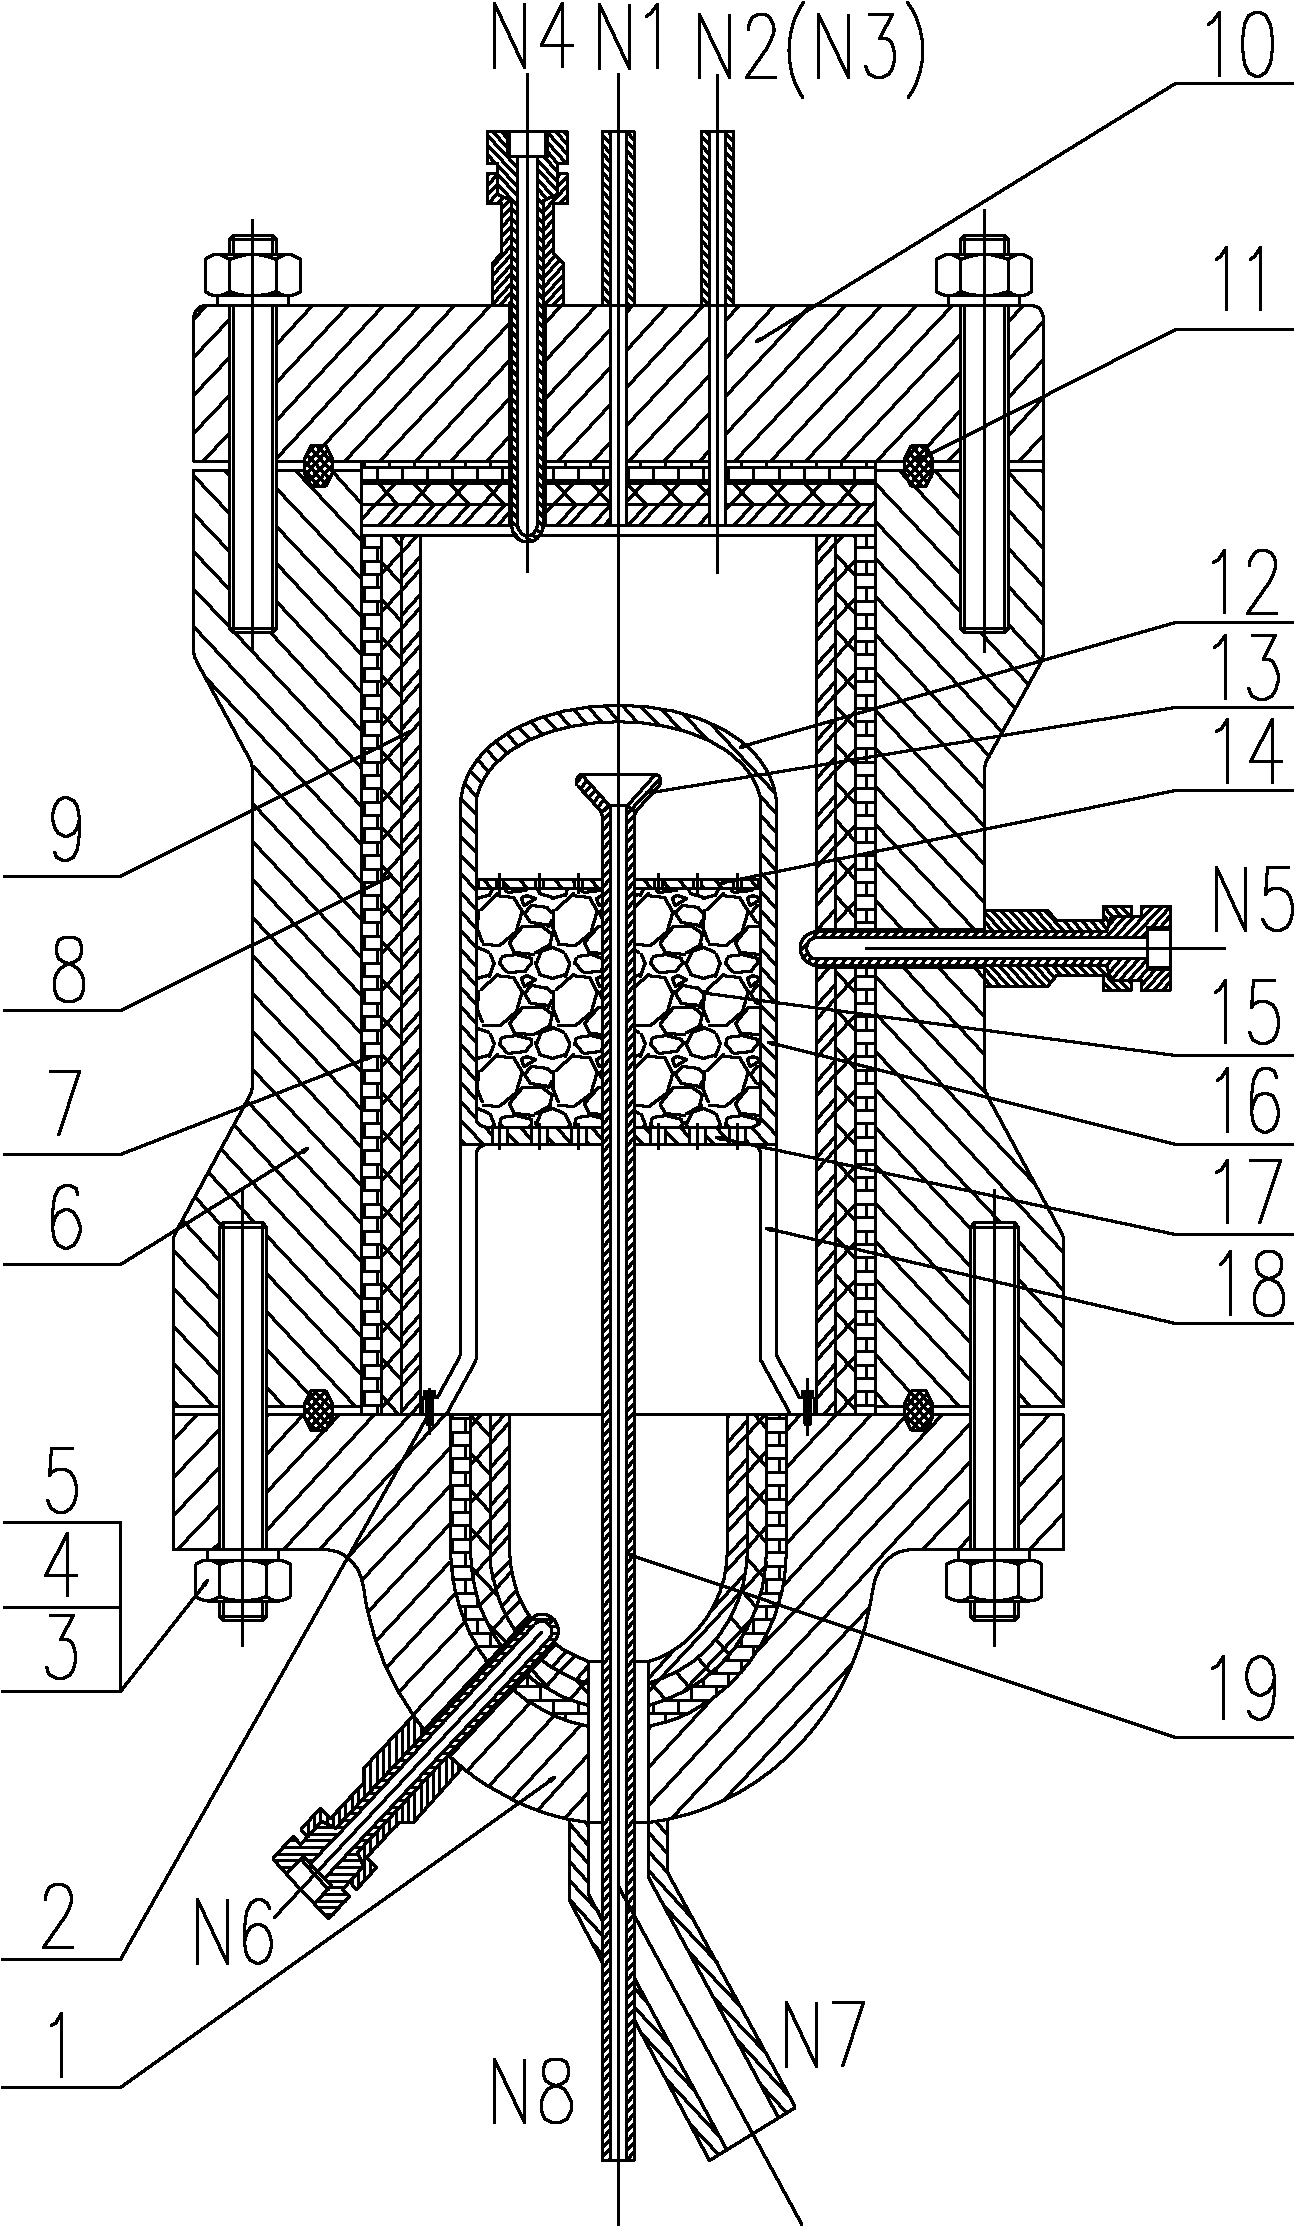 Baffling tank type supercritical water treatment reactor with sacrificial lining